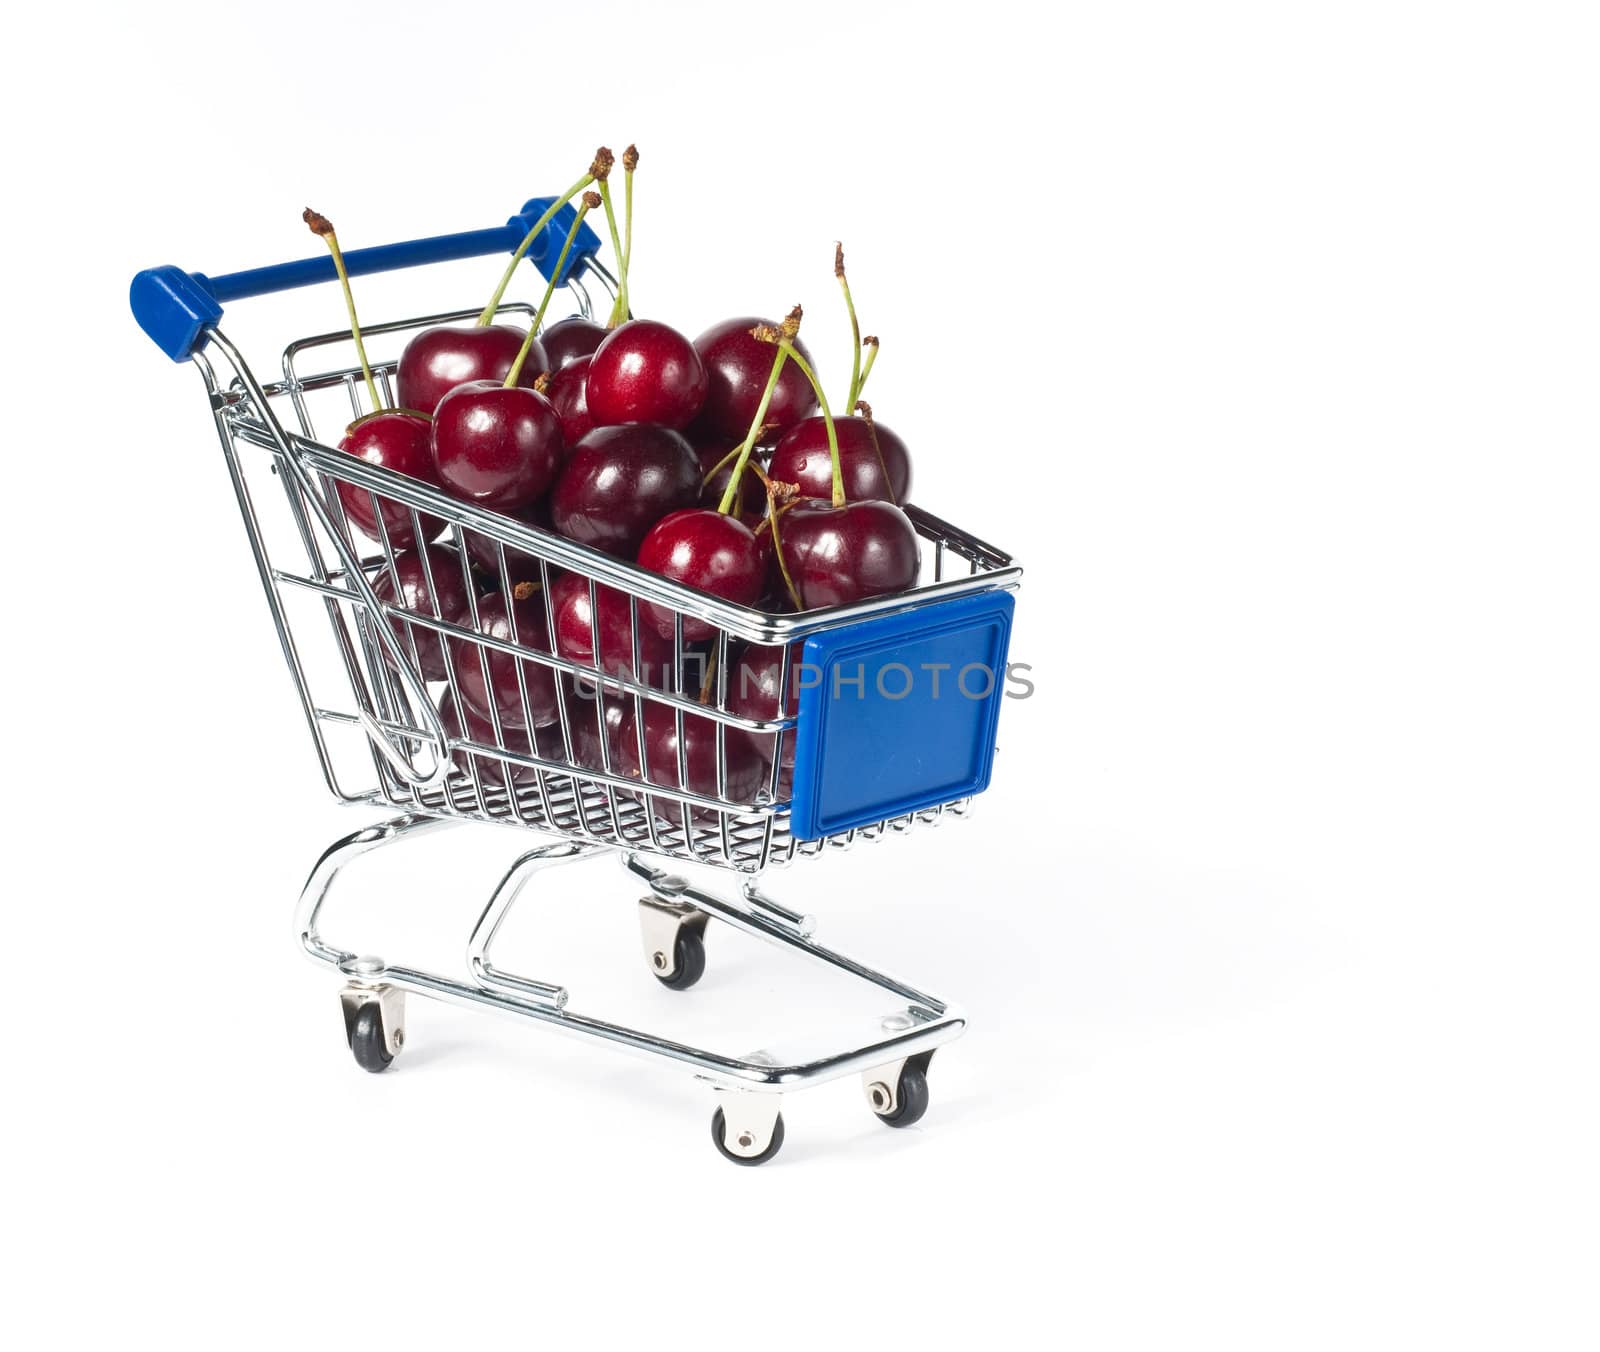 metal shopping trolley filled with cherry by Erchog